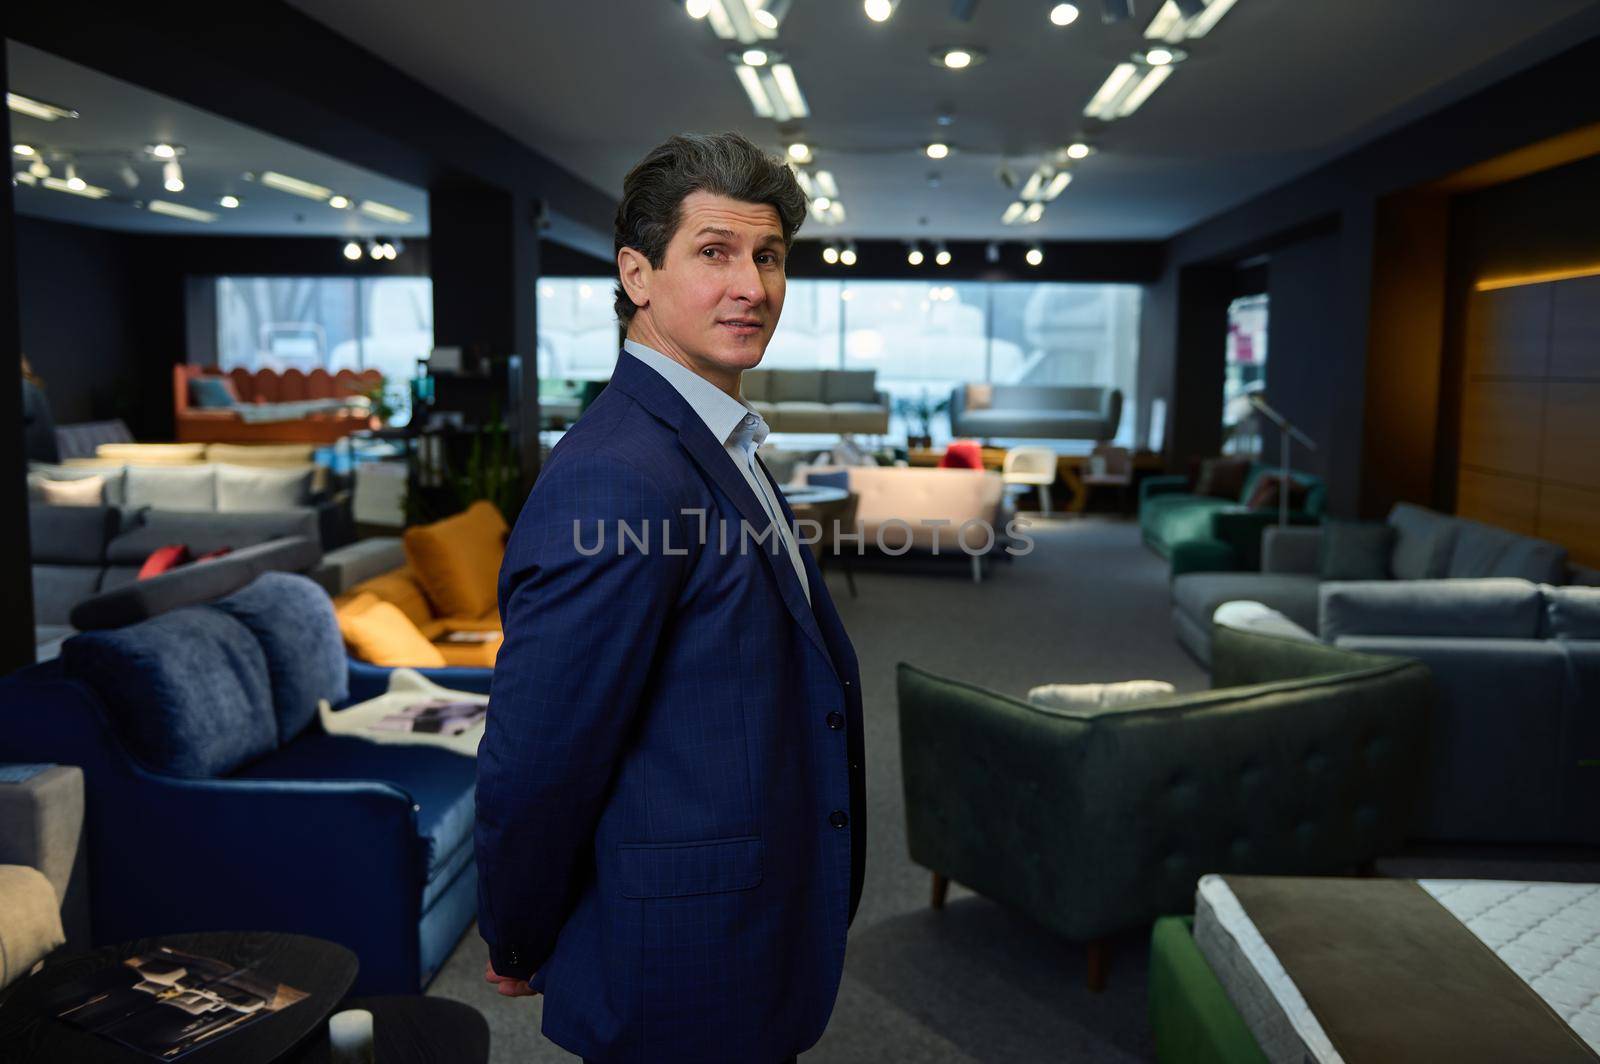 Confident business owner, entrepreneur, handsome mature man in a furniture store showroom by artgf